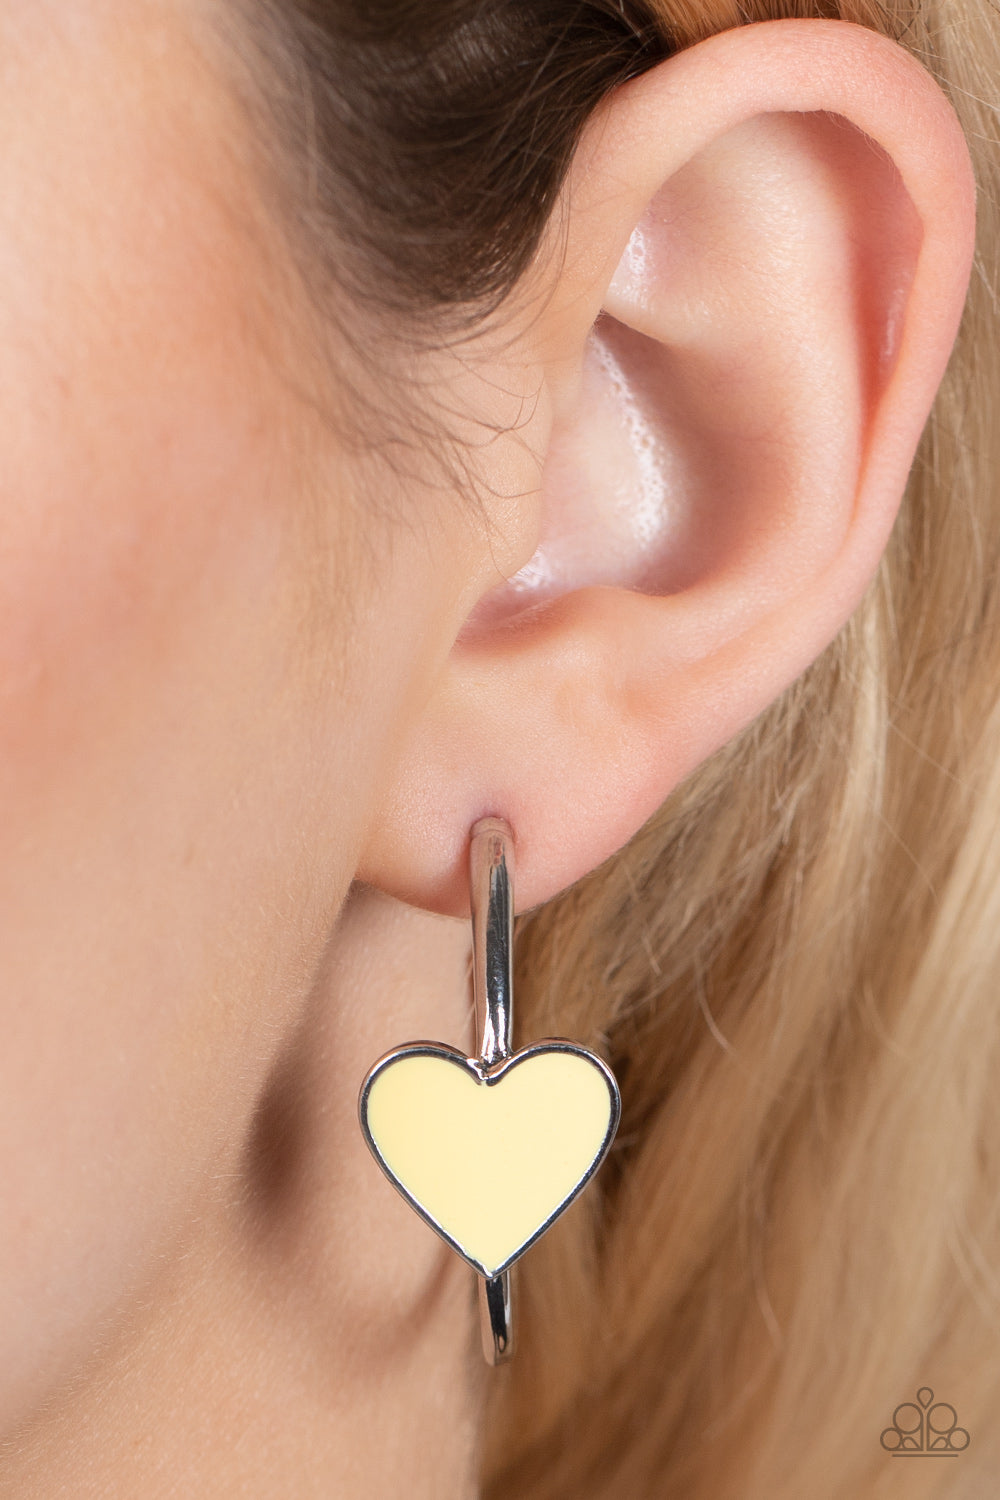 Kiss Up - Yellow Heart Hoop Earrings a charming Illuminating heart adorns the front of a classic silver hoop resulting in a whimsical fashion. Earring attaches to a standard post fitting. Hoop measures approximately 1 1/4" in diameter.  Sold as one pair of hoop earrings.  Paparazzi Jewelry is lead and nickel free so it's perfect for sensitive skin too!